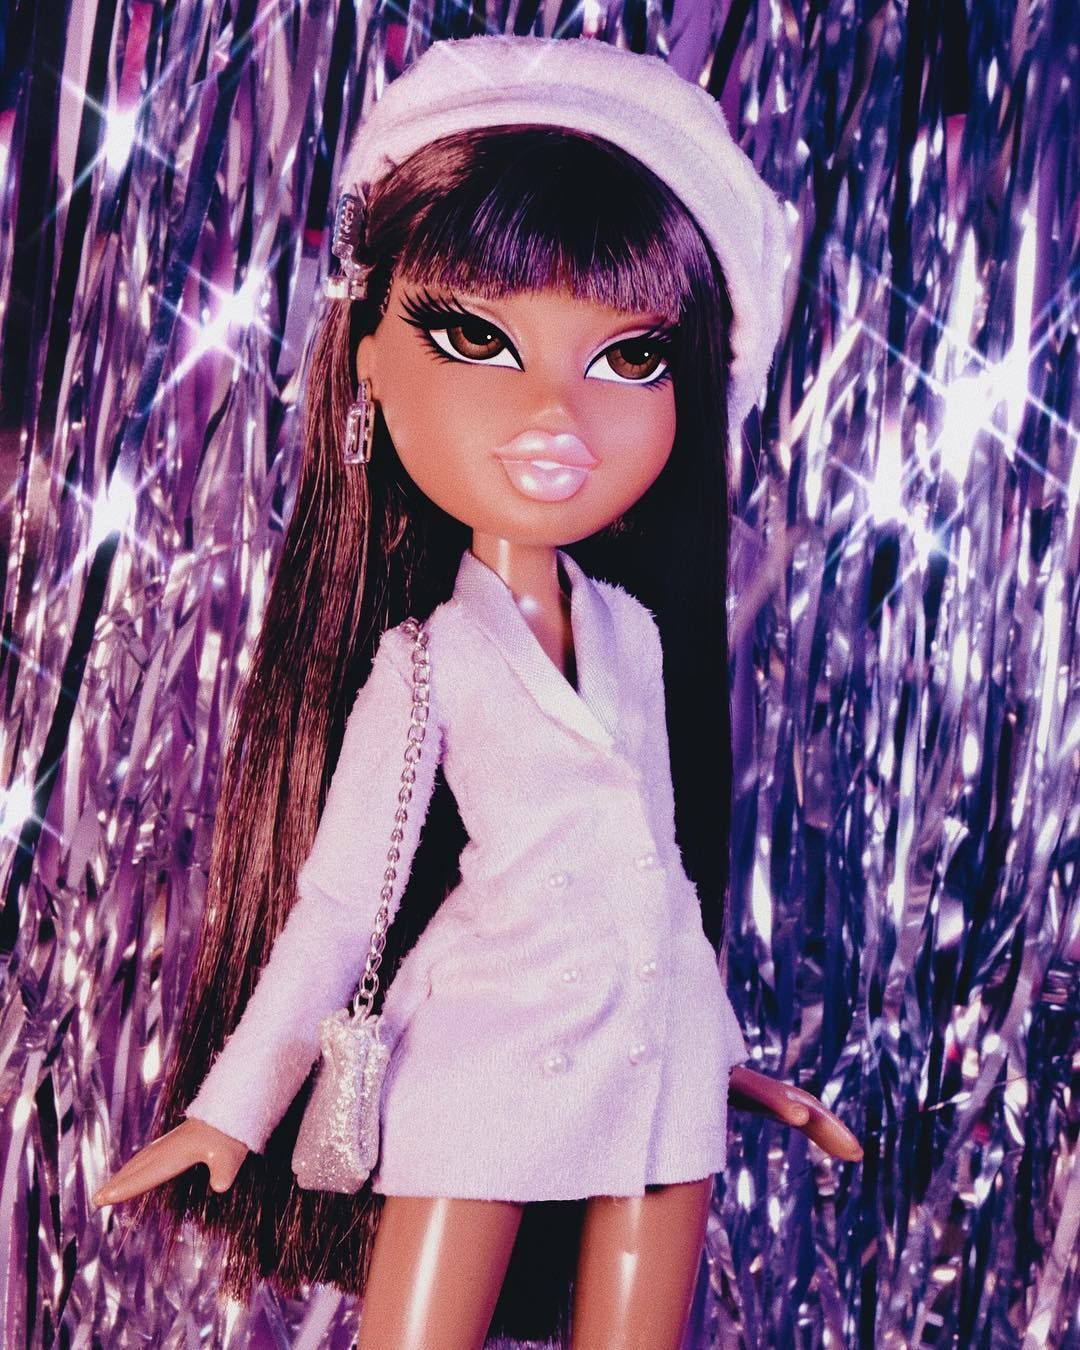 It's been a while since I posted on here and I'm glad to say that I am back! This is my newest reroot of LI. Black bratz doll, Bratz girls, Doll